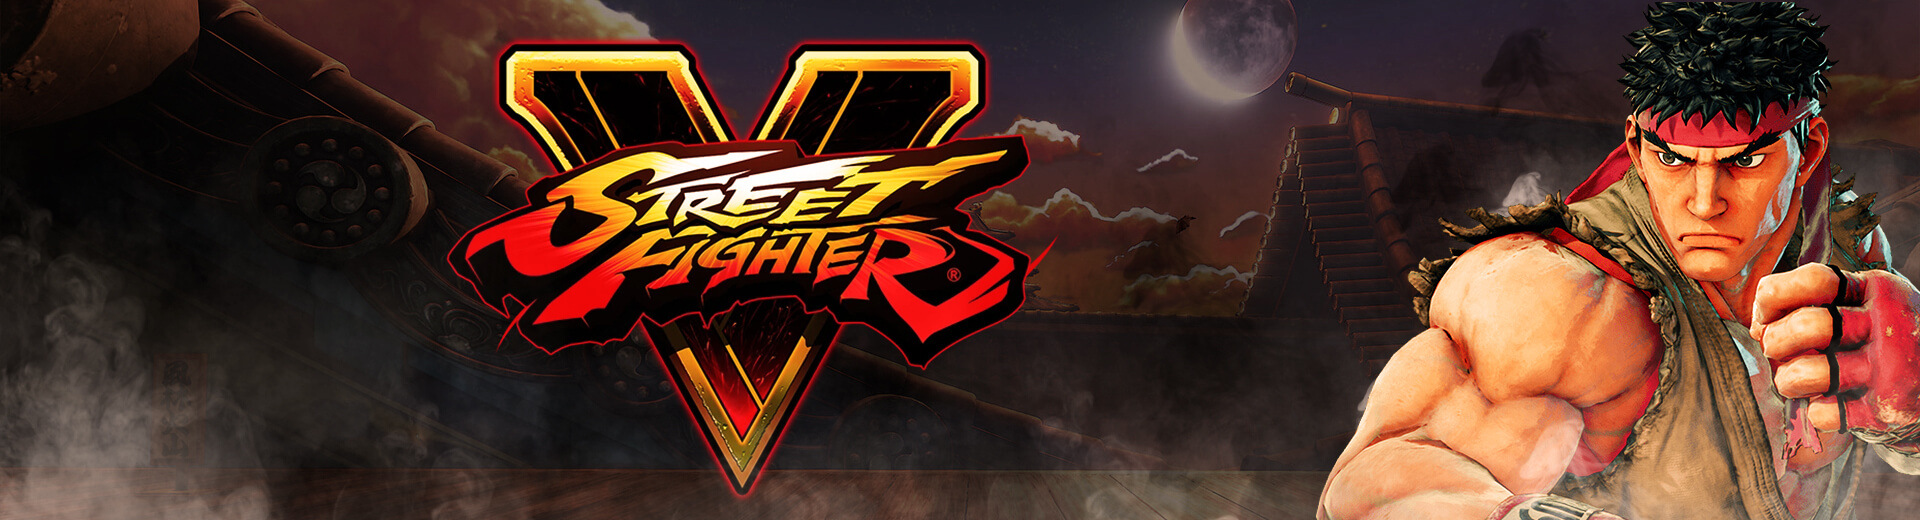 Fight for Freedom 1 - Street Fighter 5